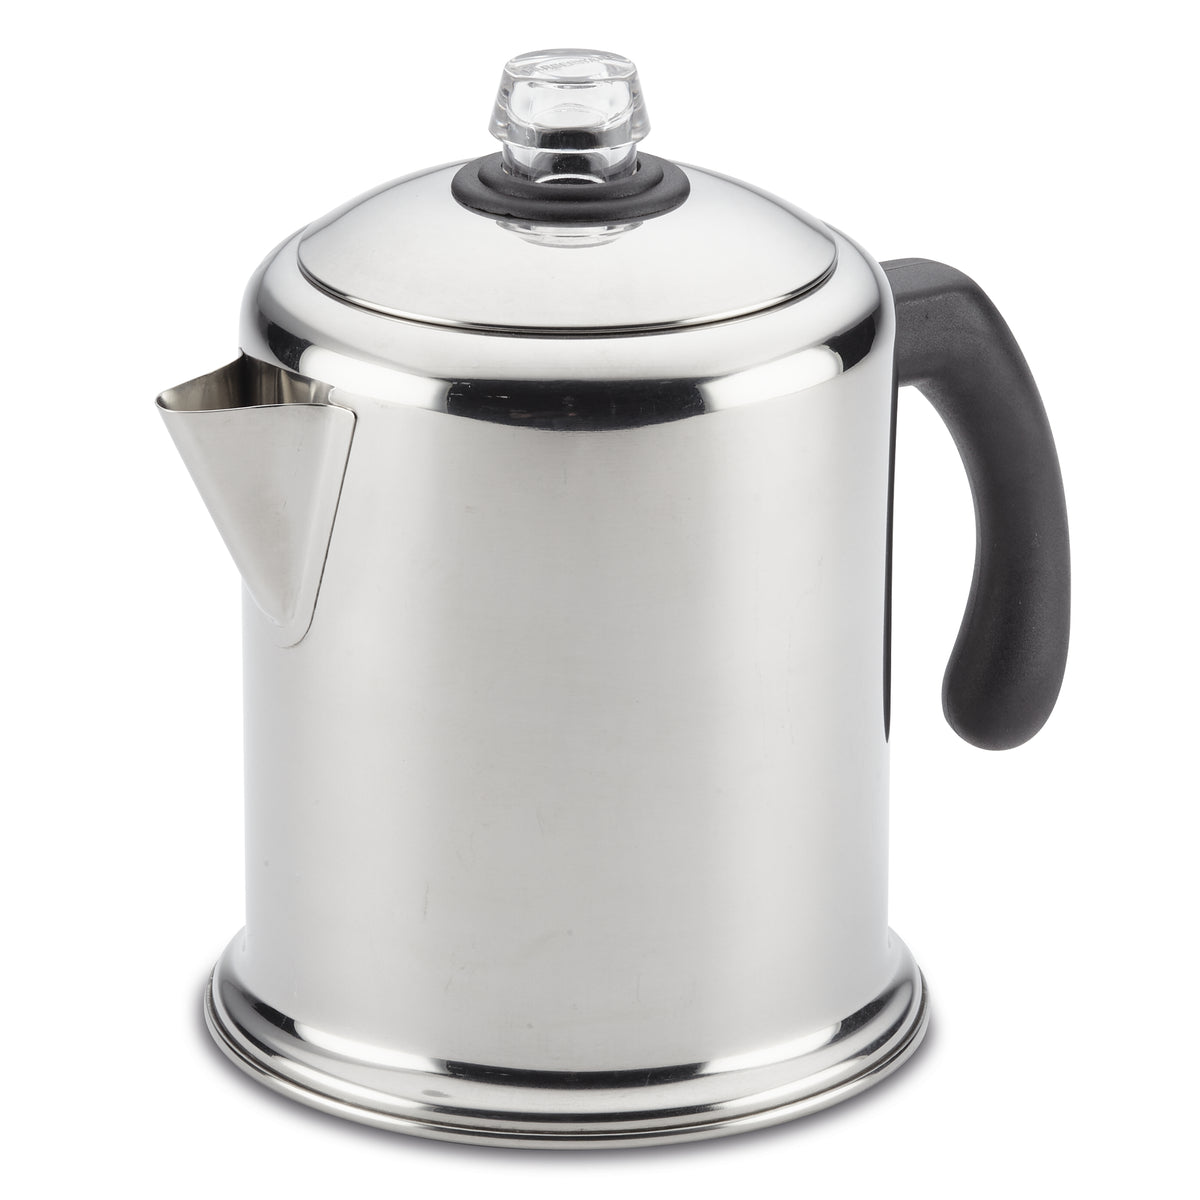 Is this percolator with 5-star reviews the best percolator?